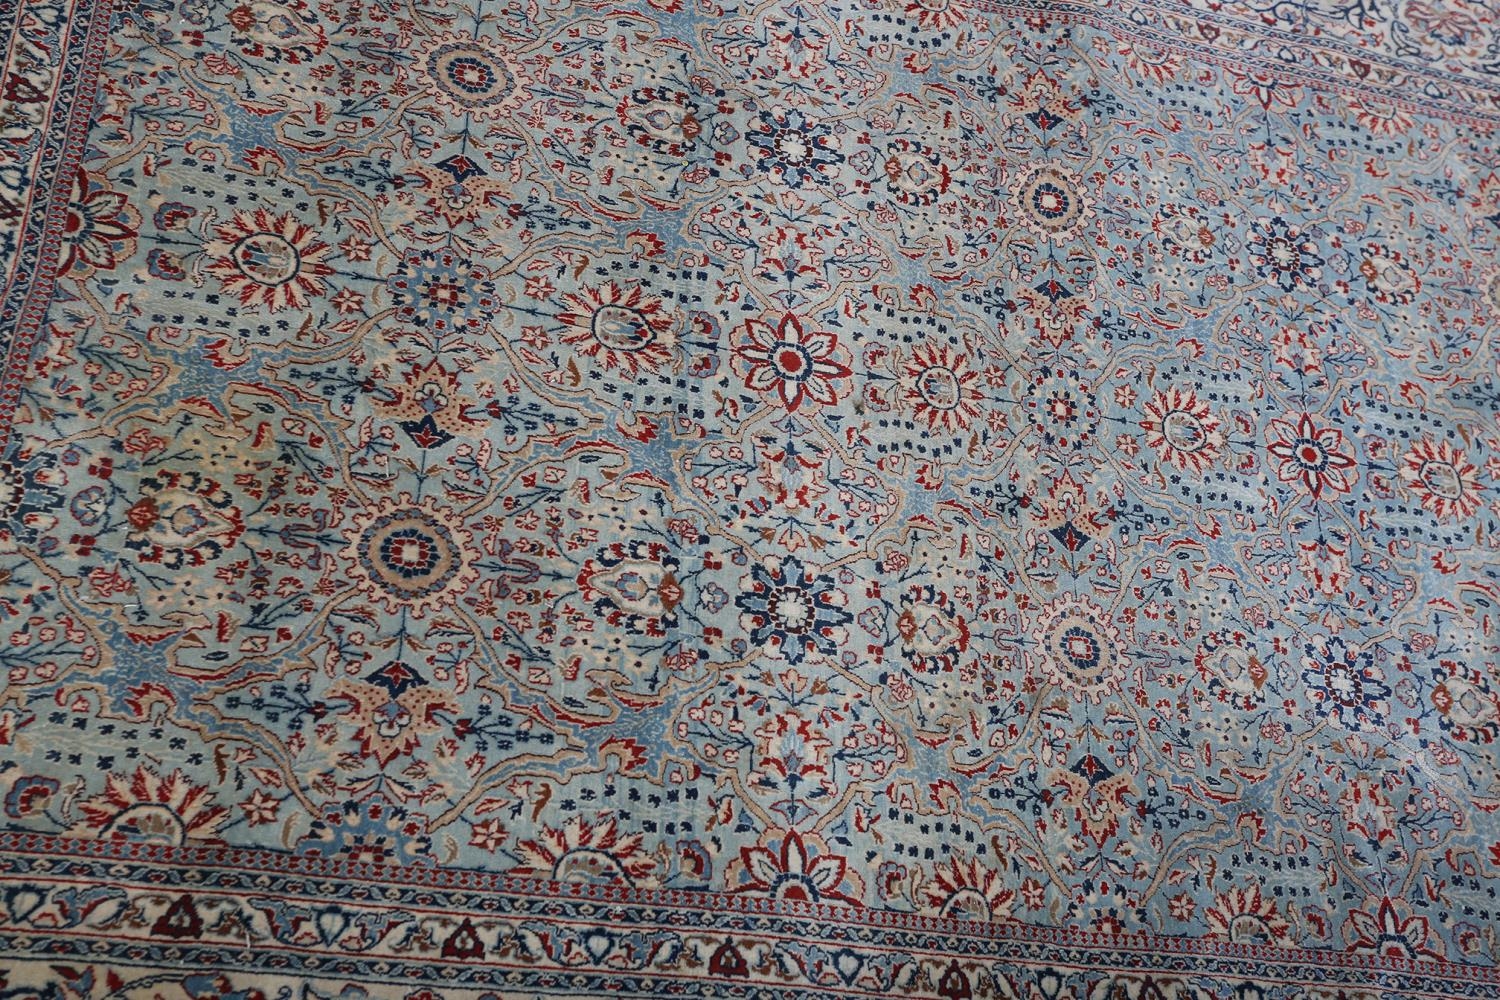 A MIDDLE EASTERN CARPET, the duck egg blue field with all-over plant forms in red, ivory, - Image 4 of 5